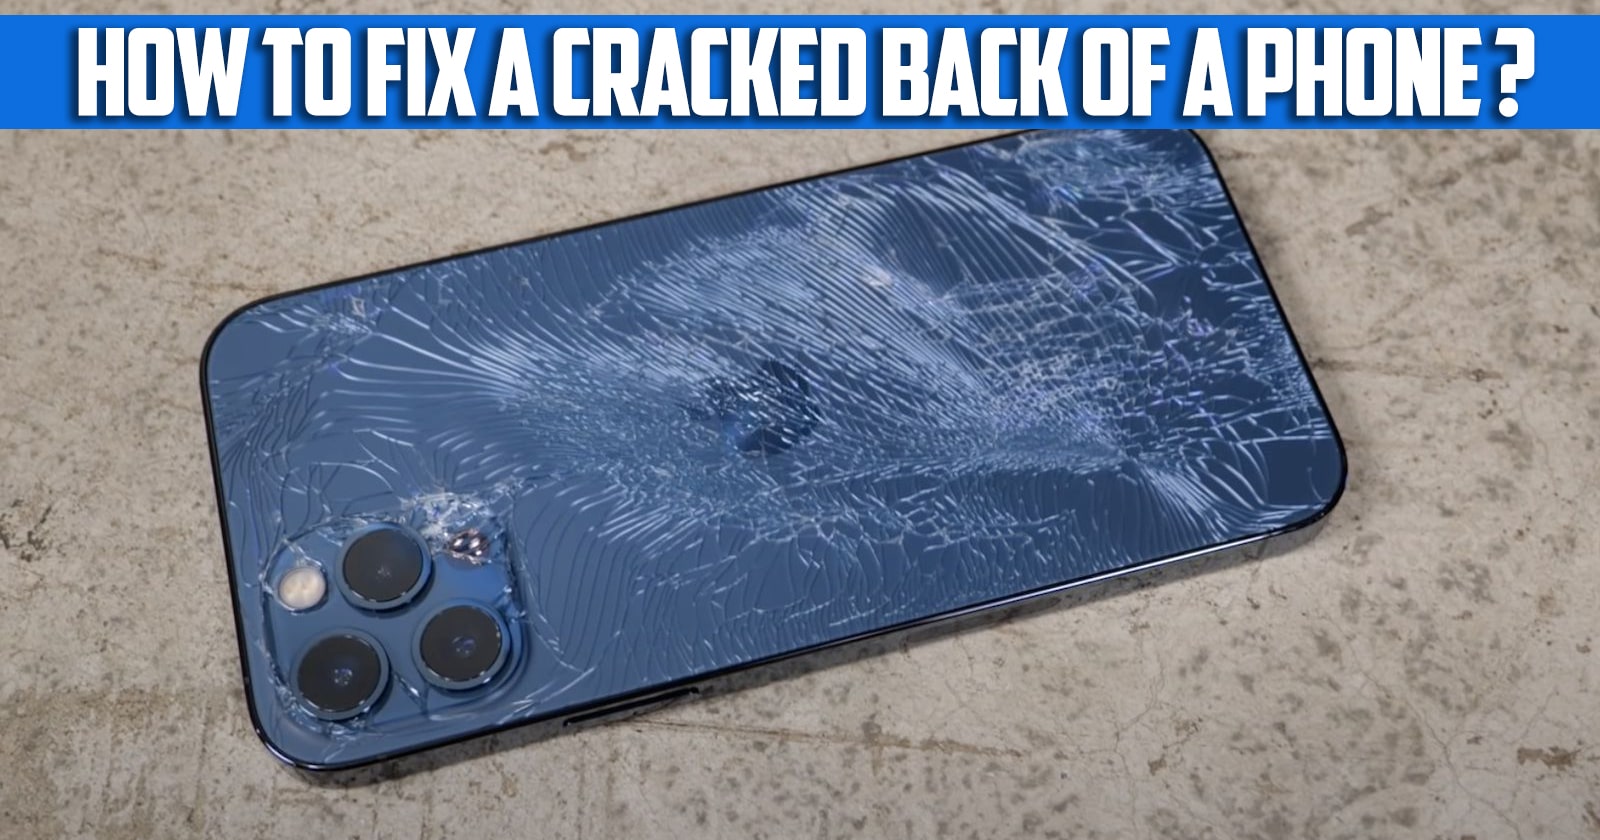 How to fix a cracked back of a phone